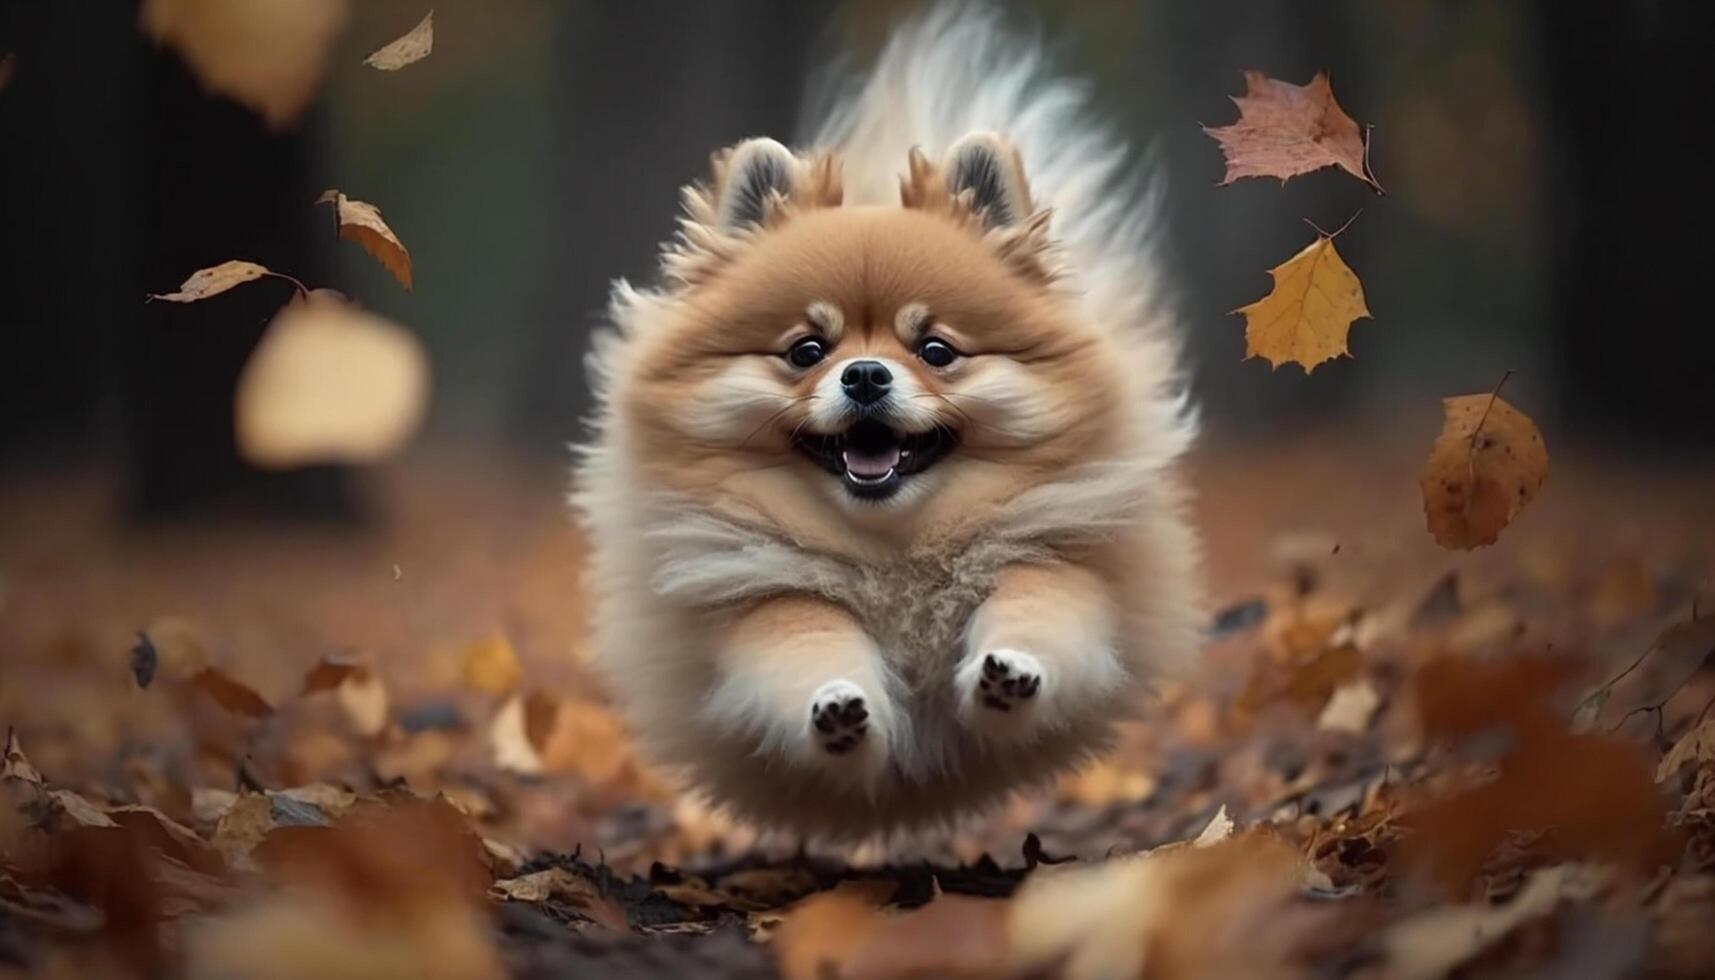 Cute Pomeranian Dog Playing in a Pile of Autumn Leaves photo